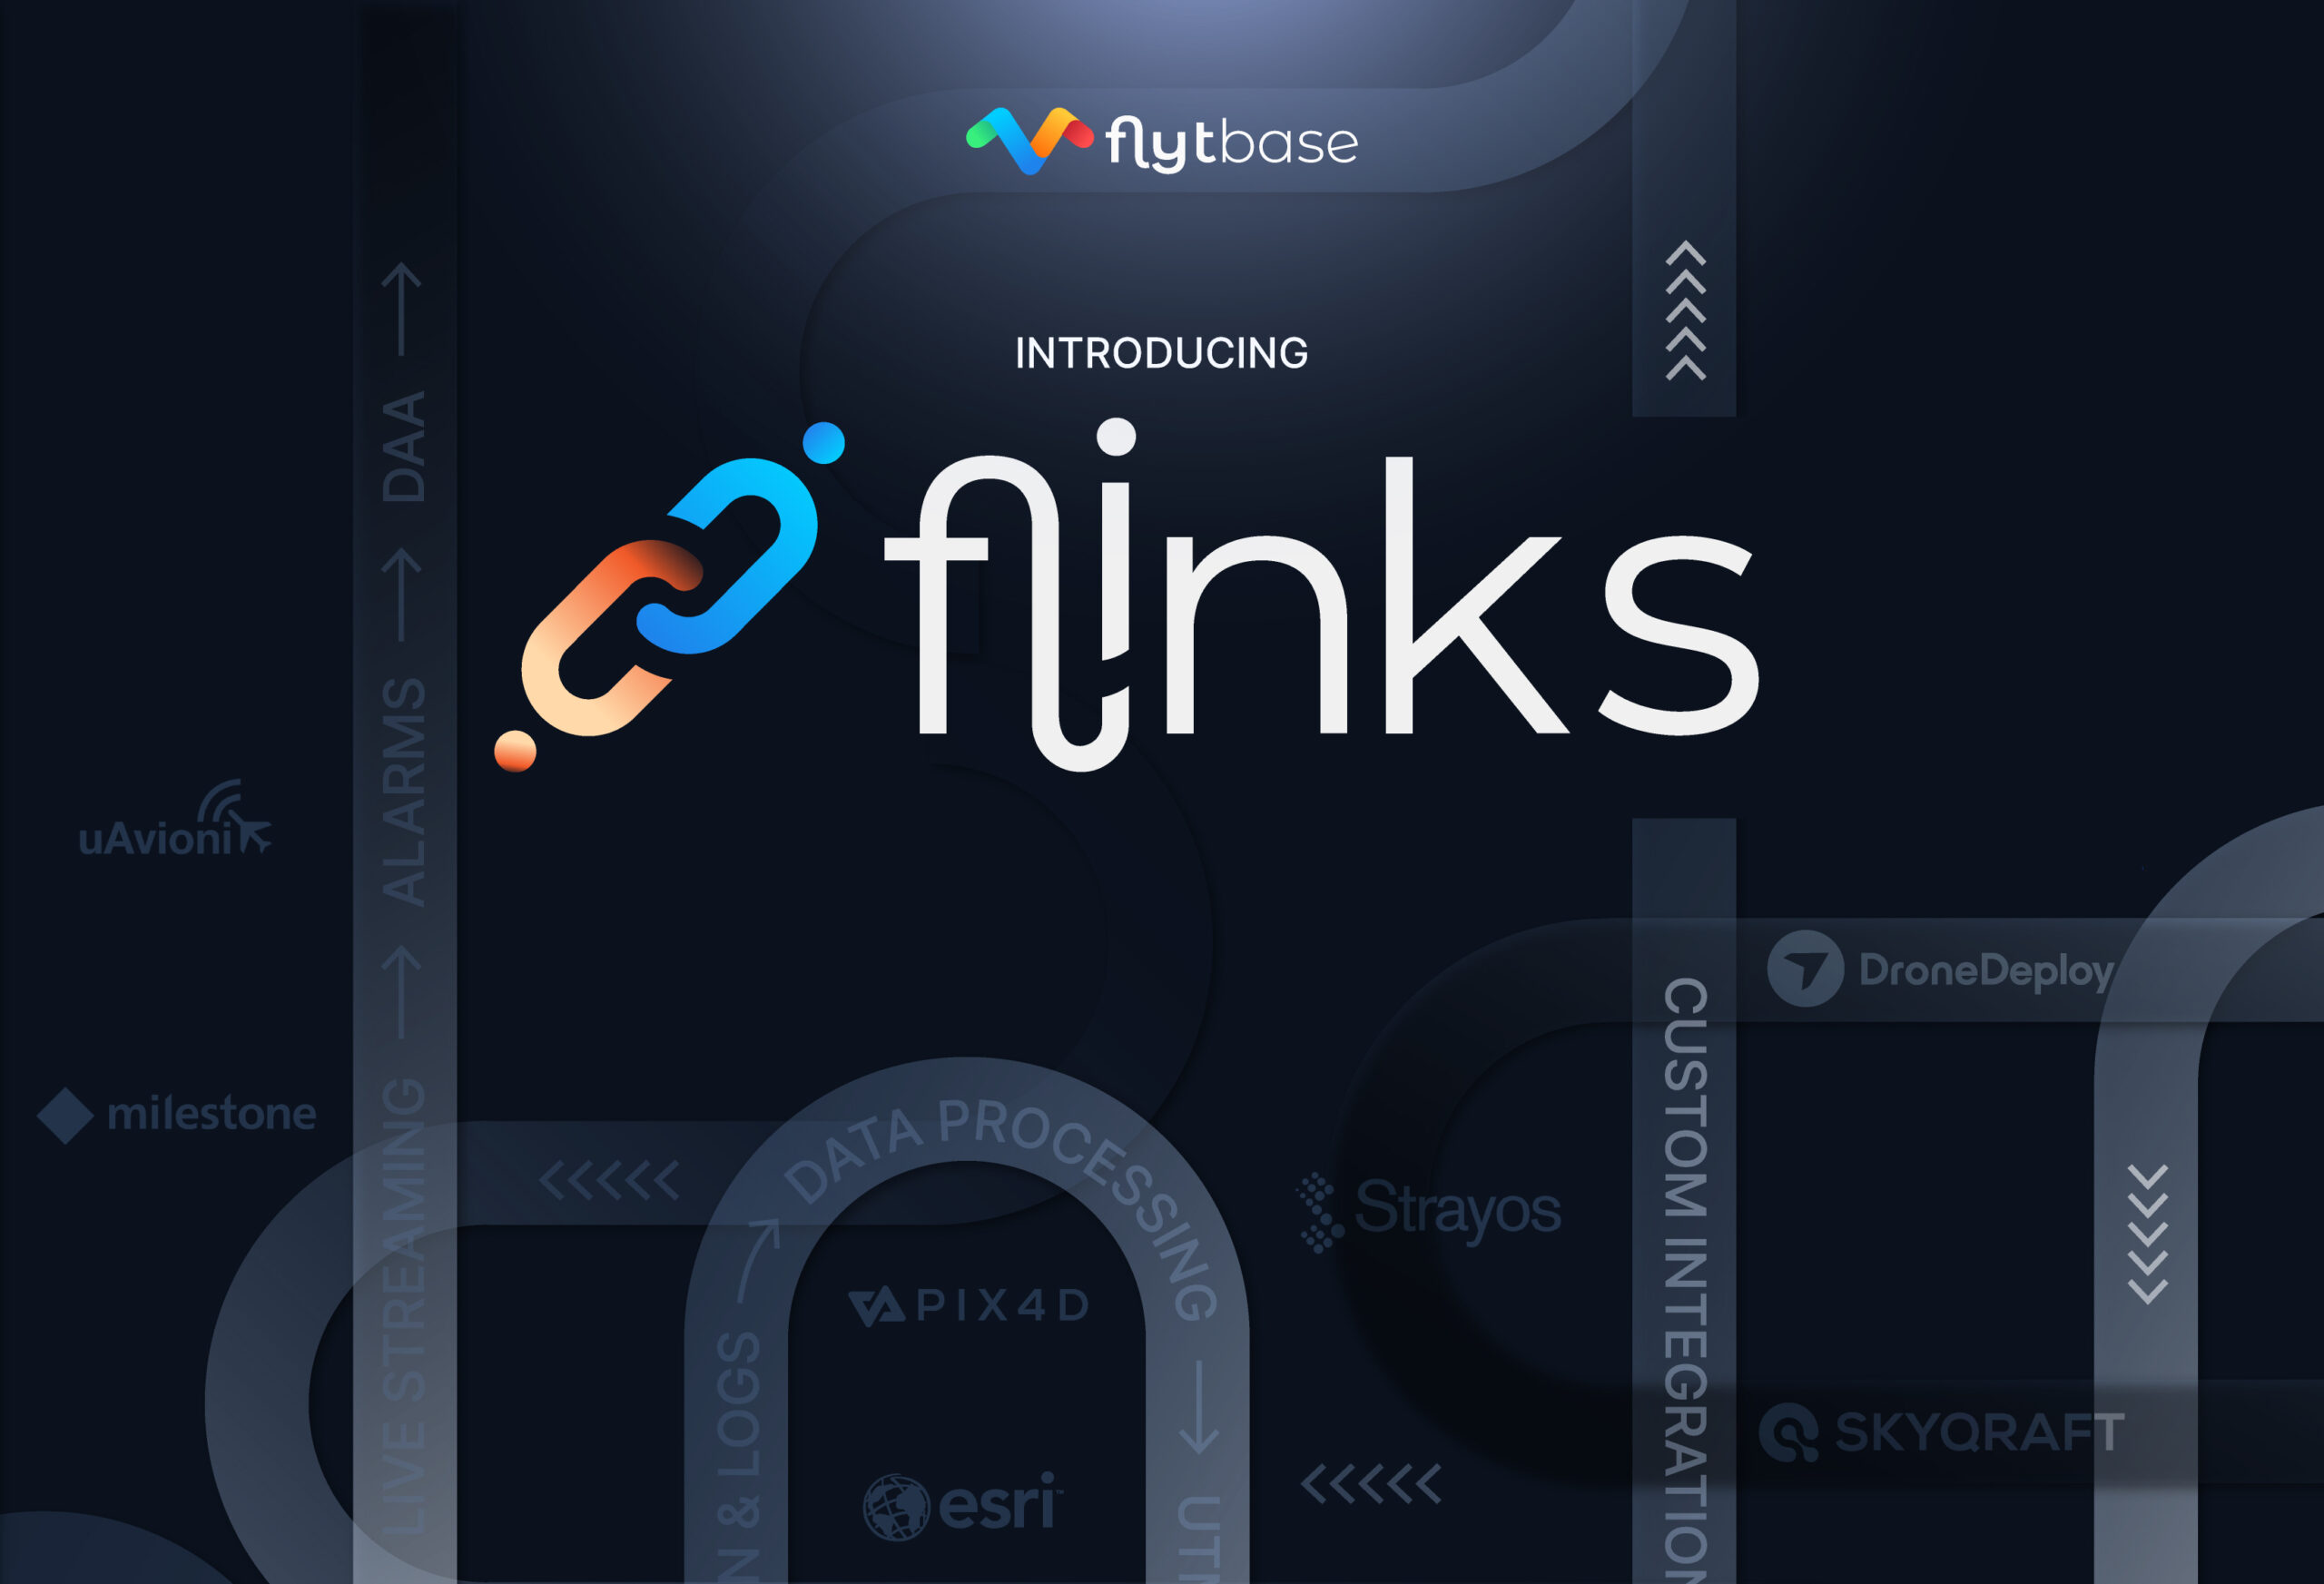 FlytBase Launches Flinks for Integration of Enterprise Drone Operations